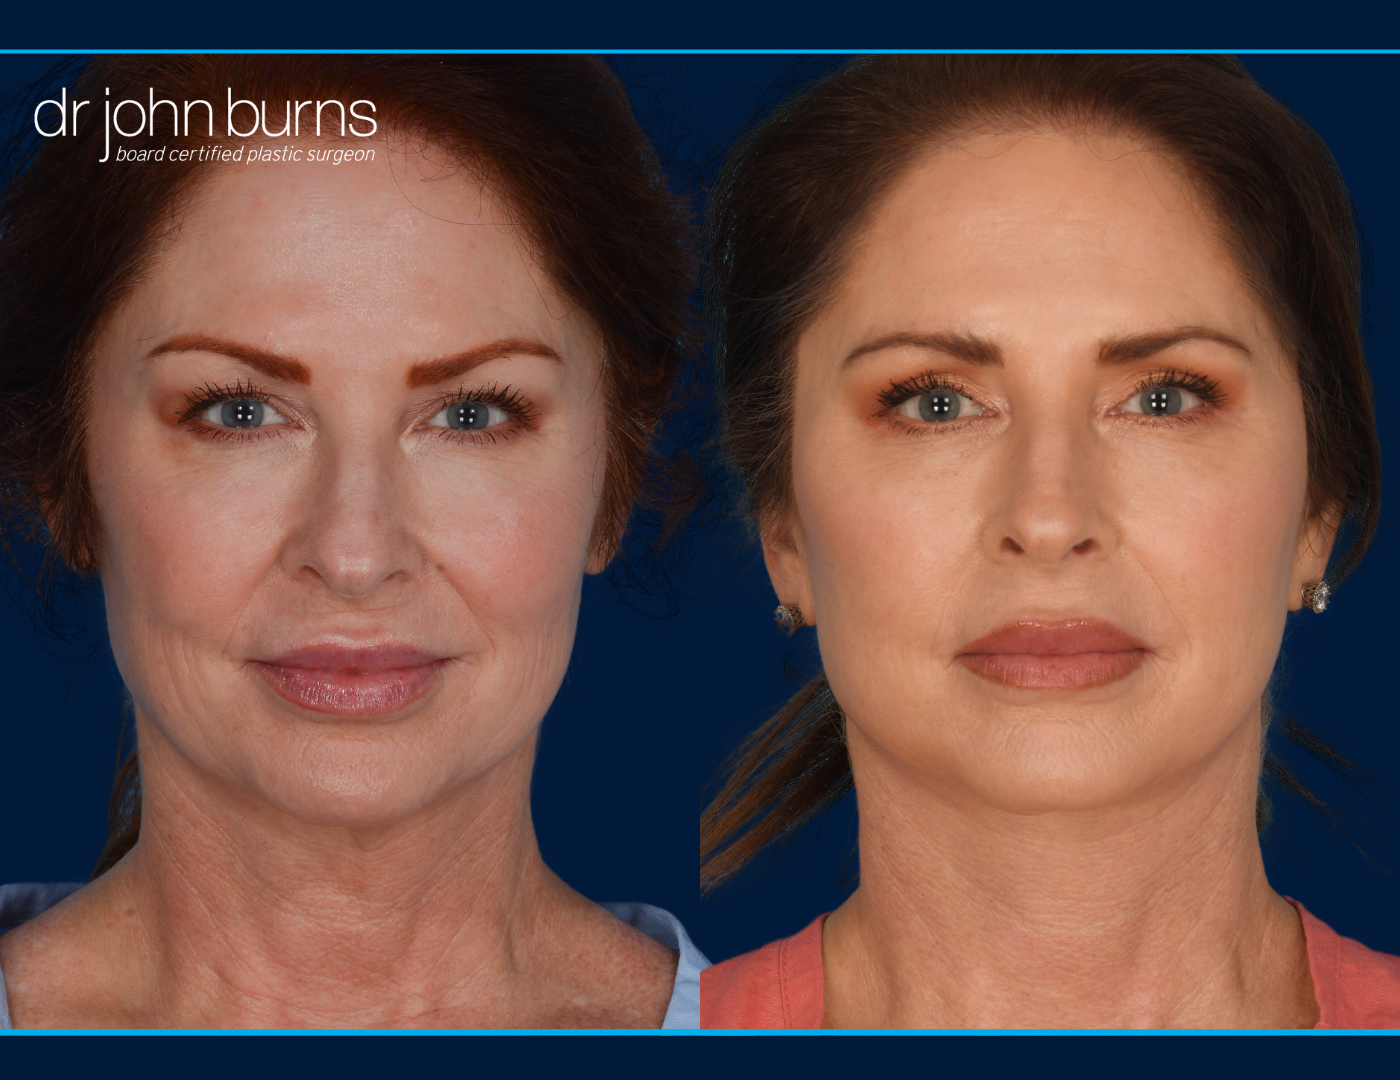 Facelift before and after by Dr. John Burns MD- Dallas Plastic Surgeon